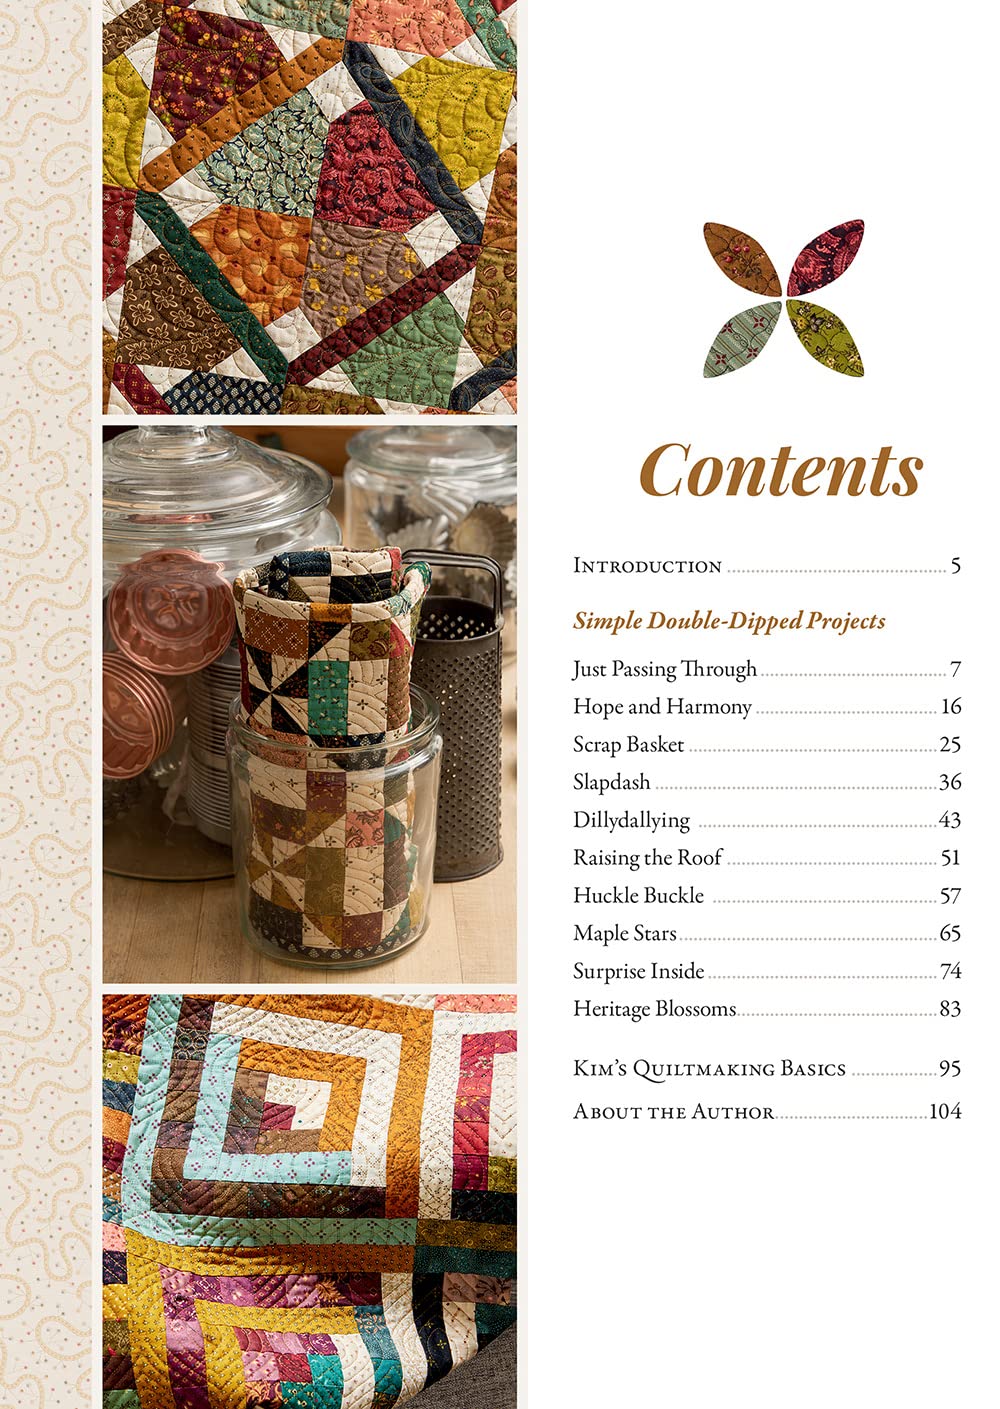 Simple Double-Dipped Quilts Book